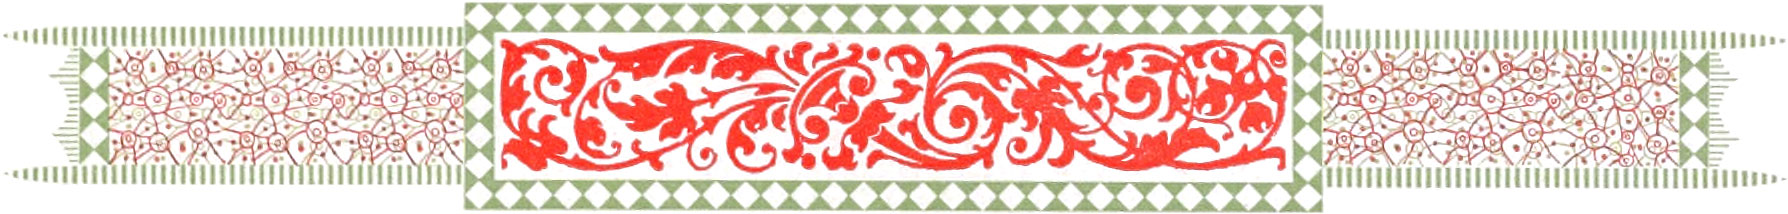 Ornate border comprising red and olive colors